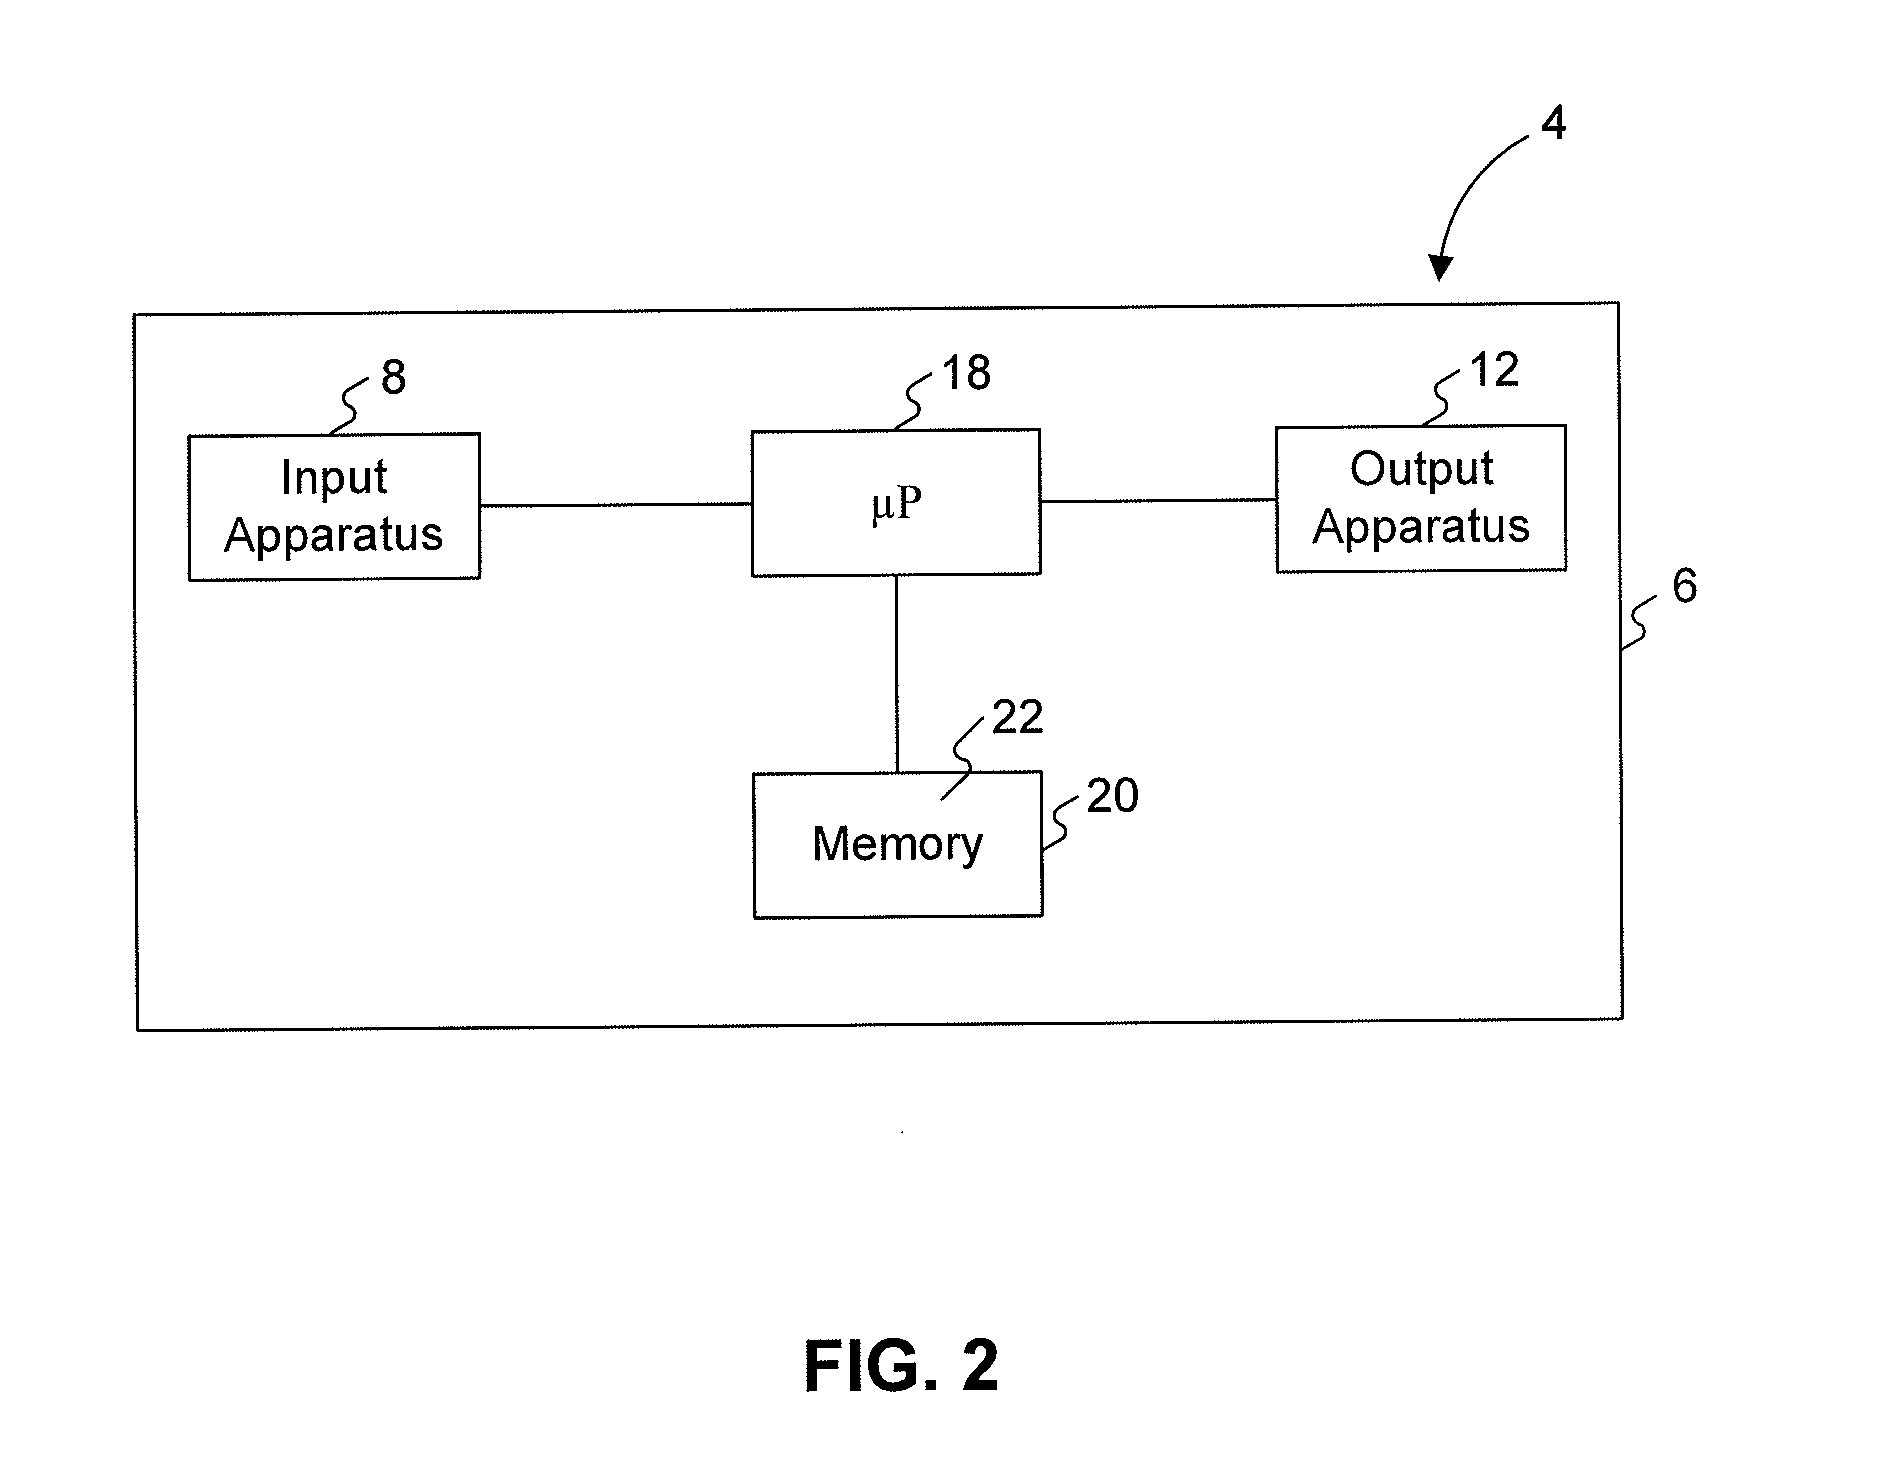 Multi-Action Capacitive Switch and Methods of Use